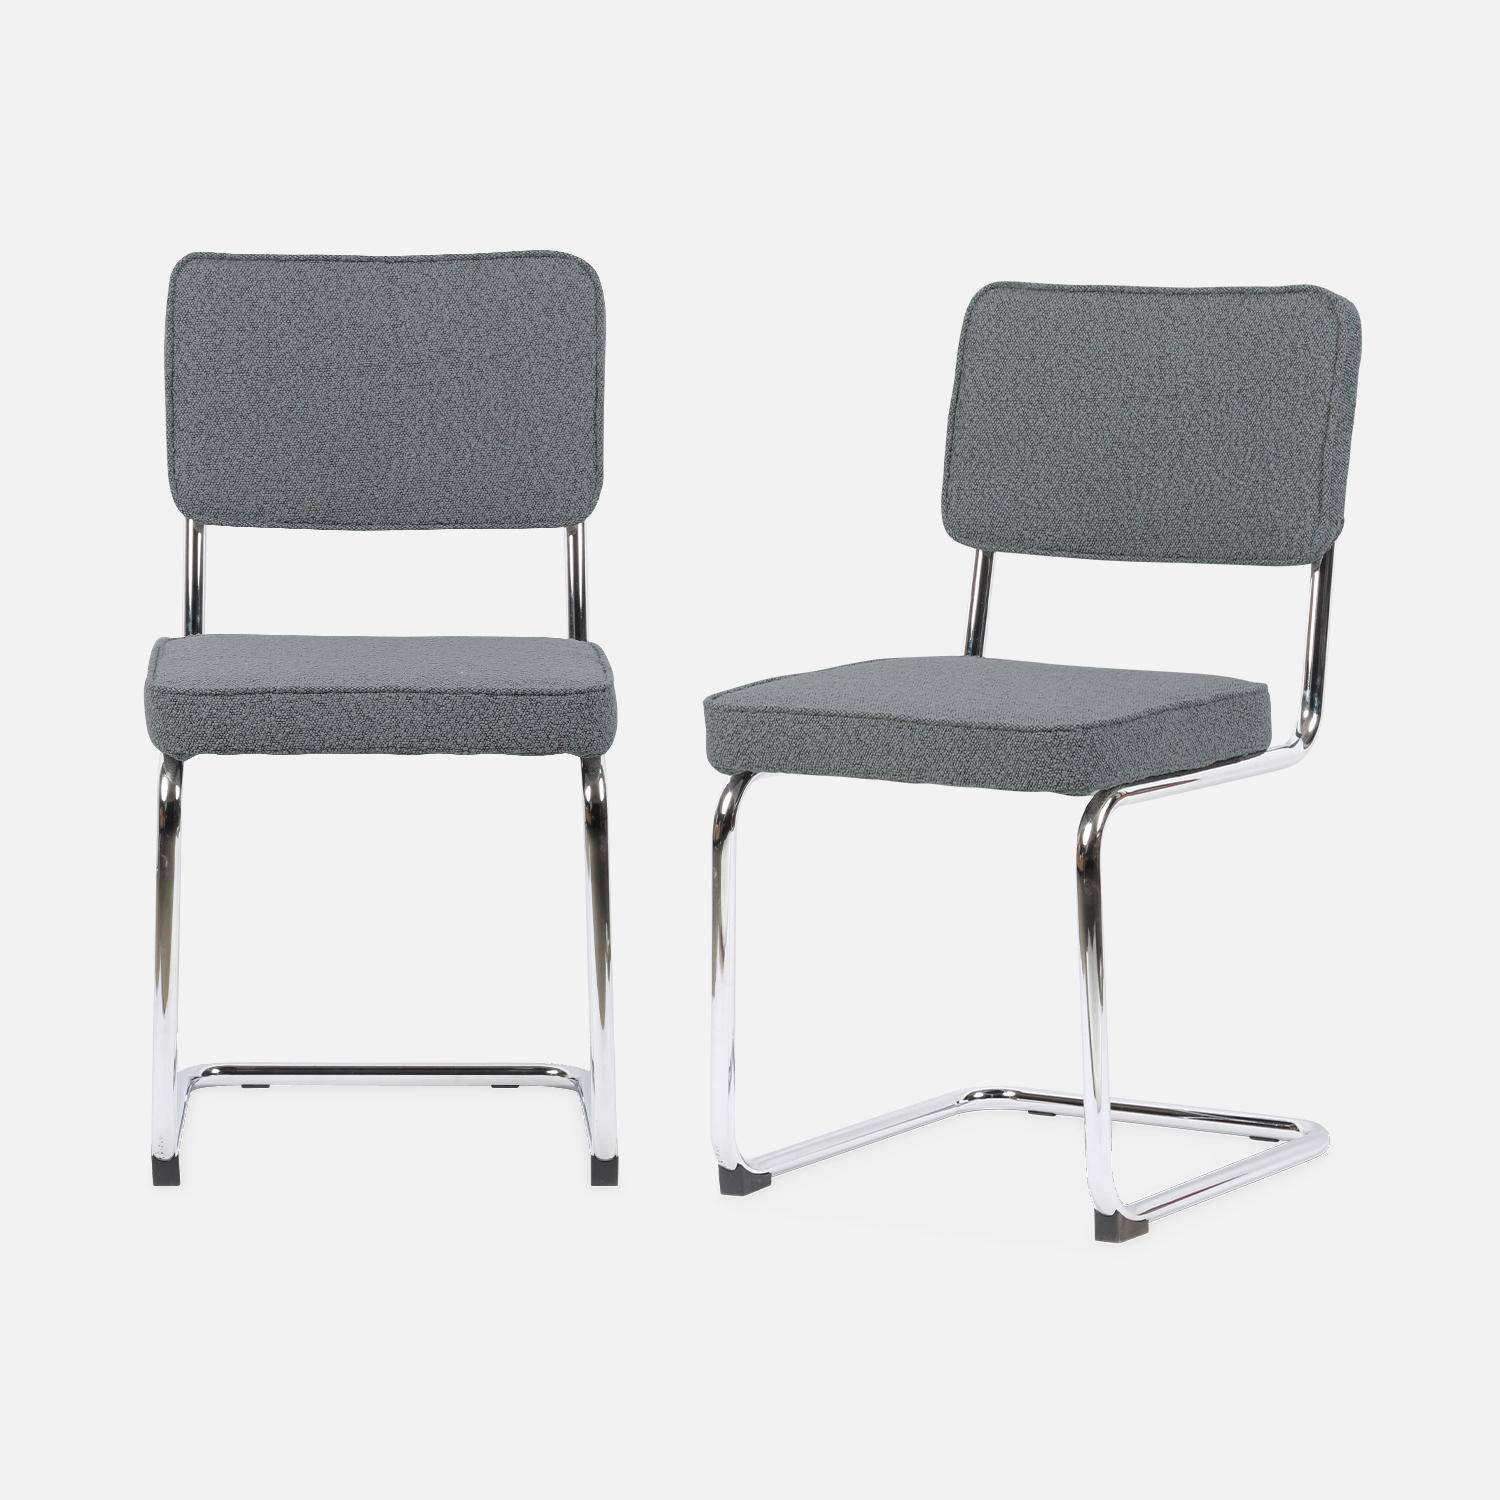 Pair of boucle cantilever dining chairs, 46x54.5x81cm - Maja - Grey,sweeek,Photo4